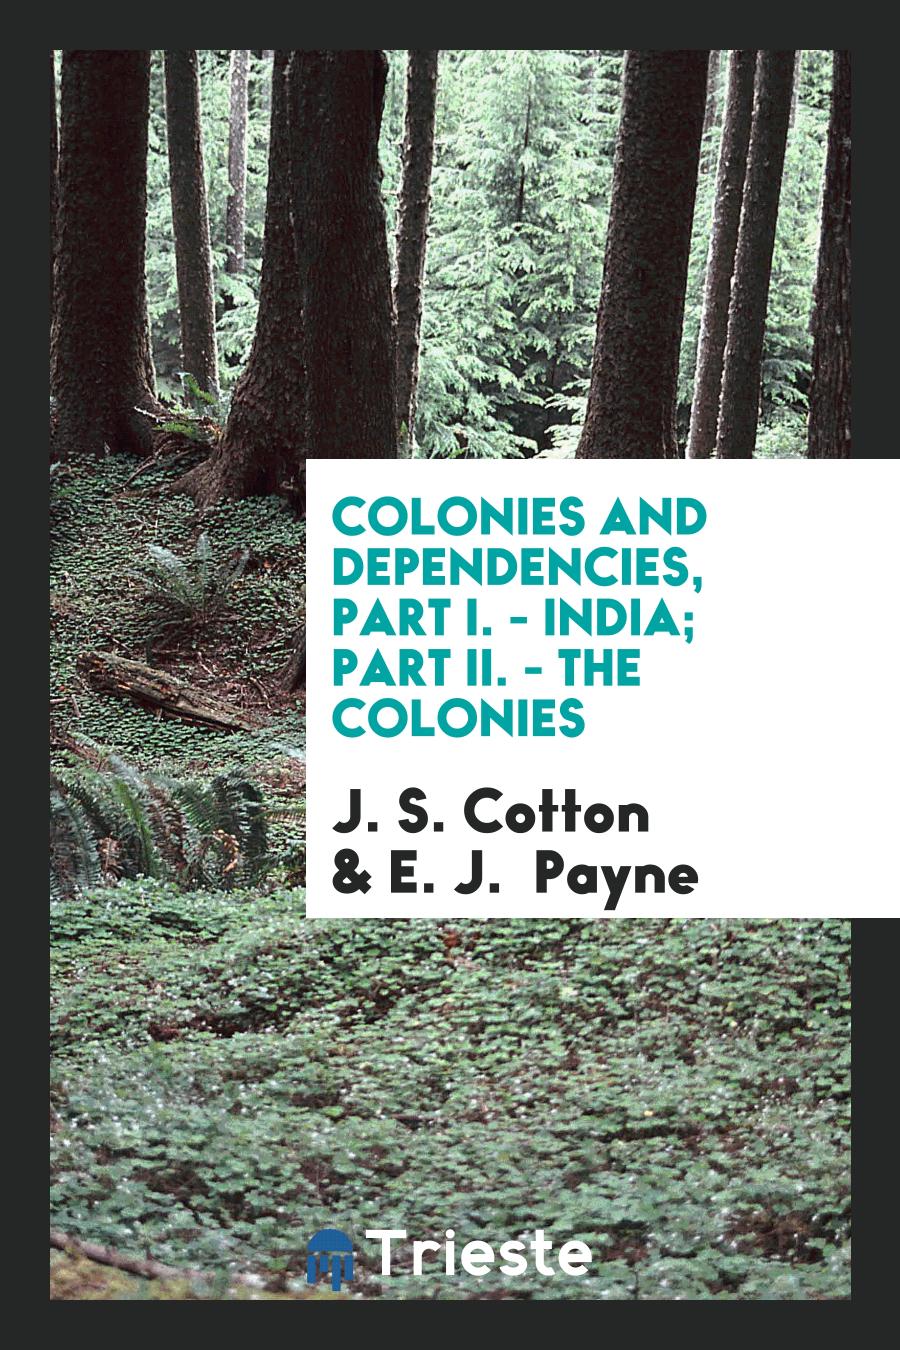 Colonies and Dependencies, Part I. - India; Part II. - The Colonies